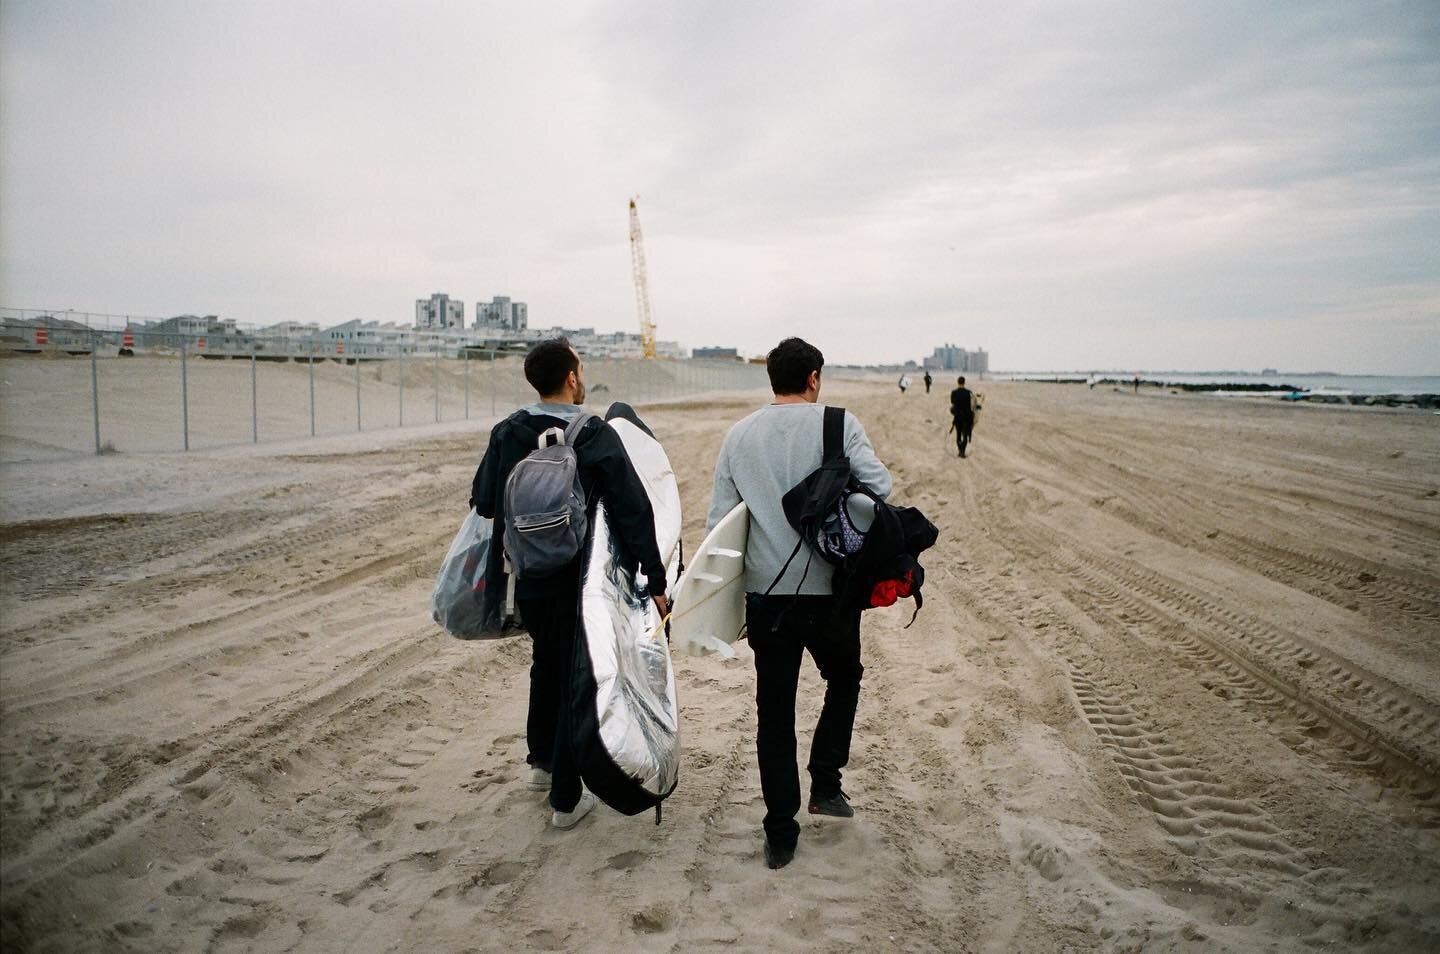 Old hard drives Vol. 2, random rockaway day including @jon_brown and my prom pic 👬